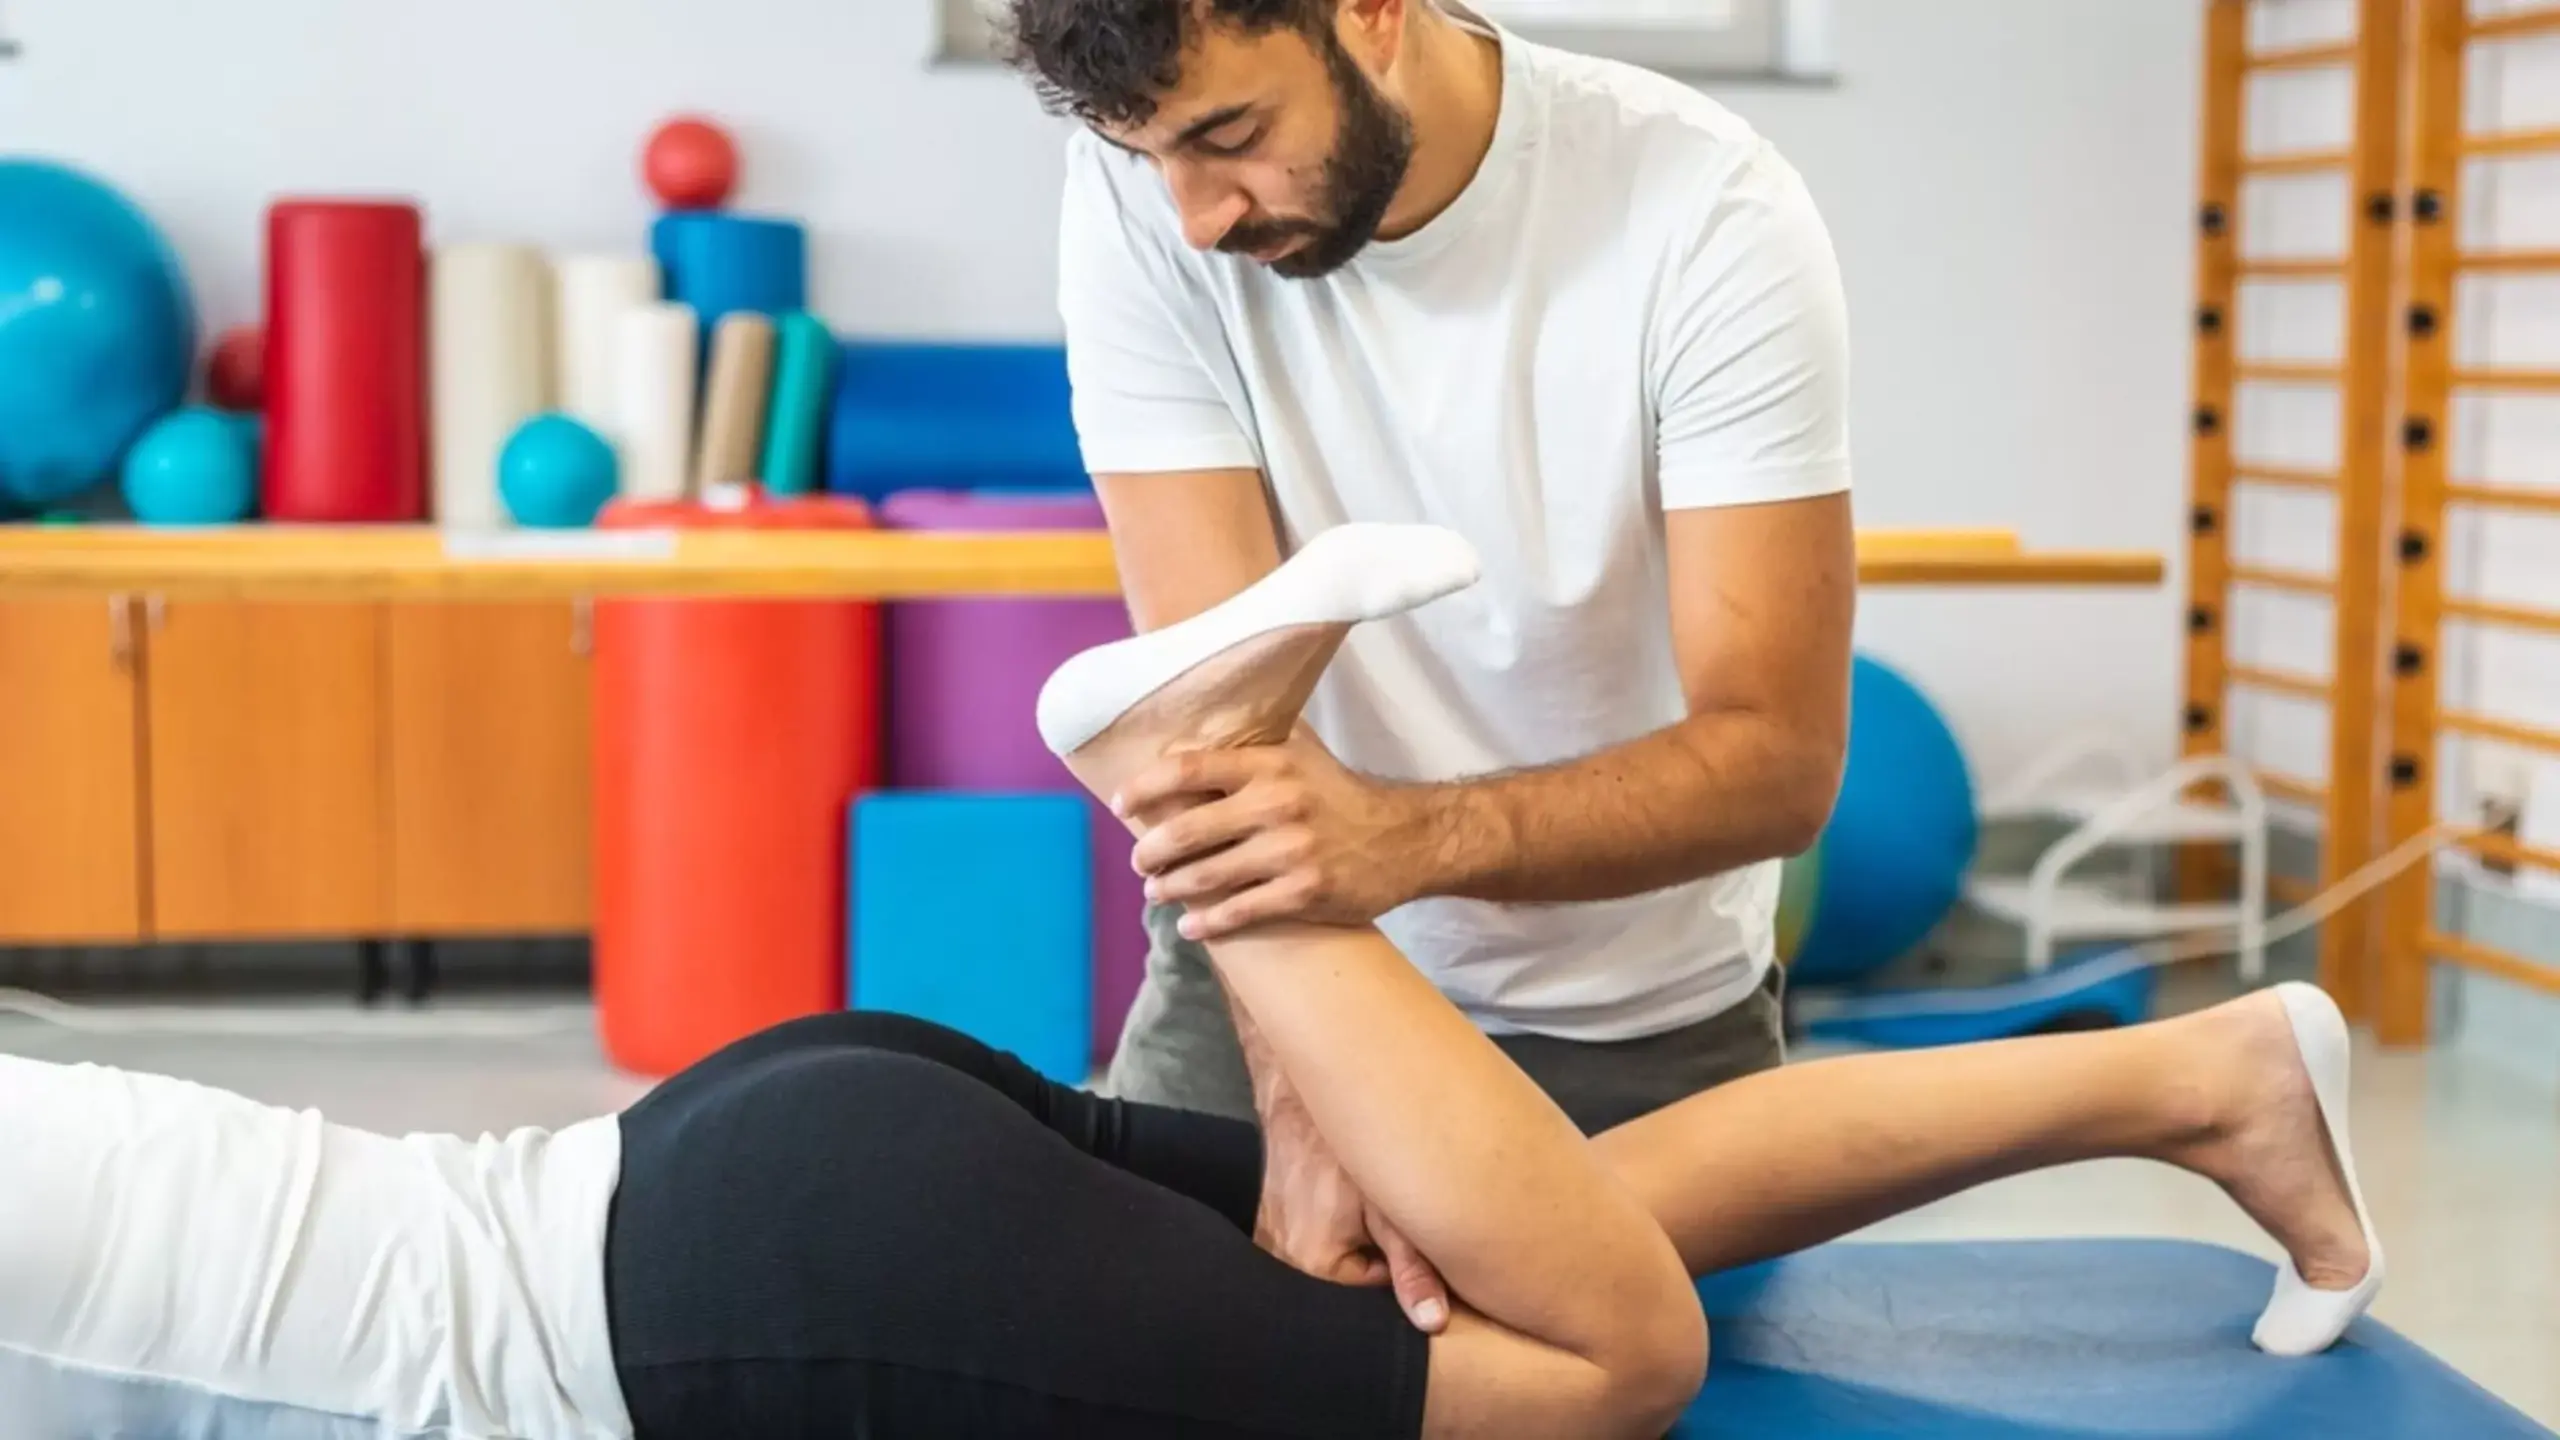 How to Ease Sciatica Pain with Physical Therapy